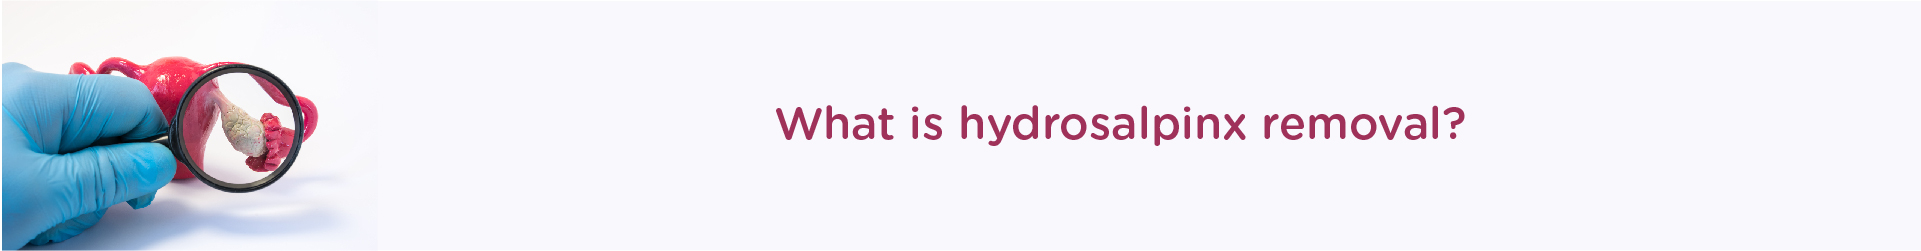 What is Hydrosalpinx Removal?